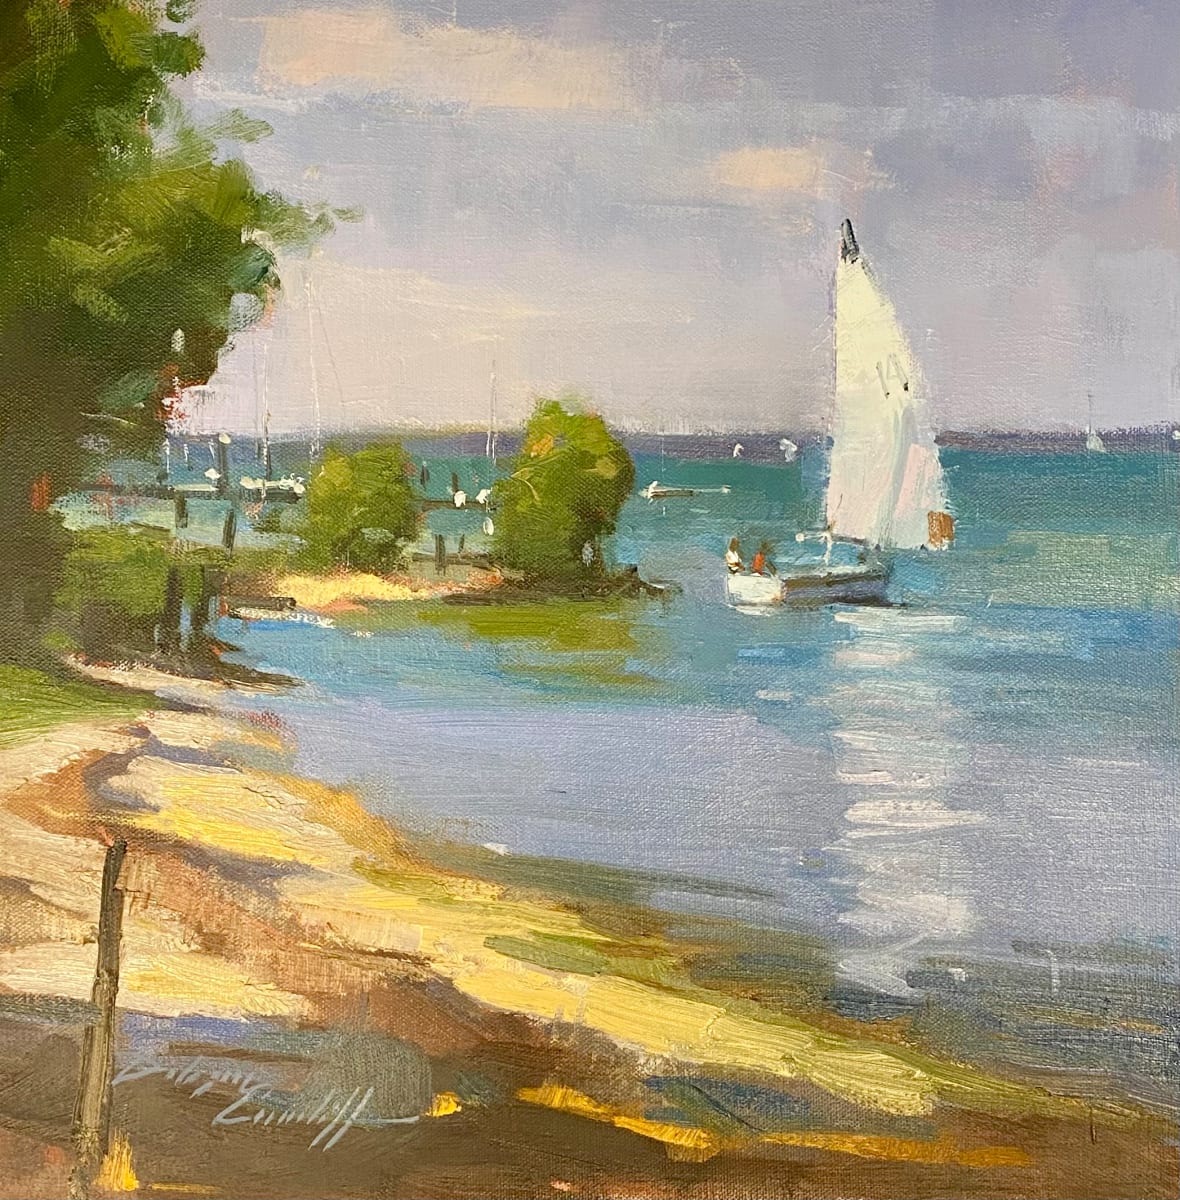 Sailing on the Bay by Katie Dobson Cundiff 